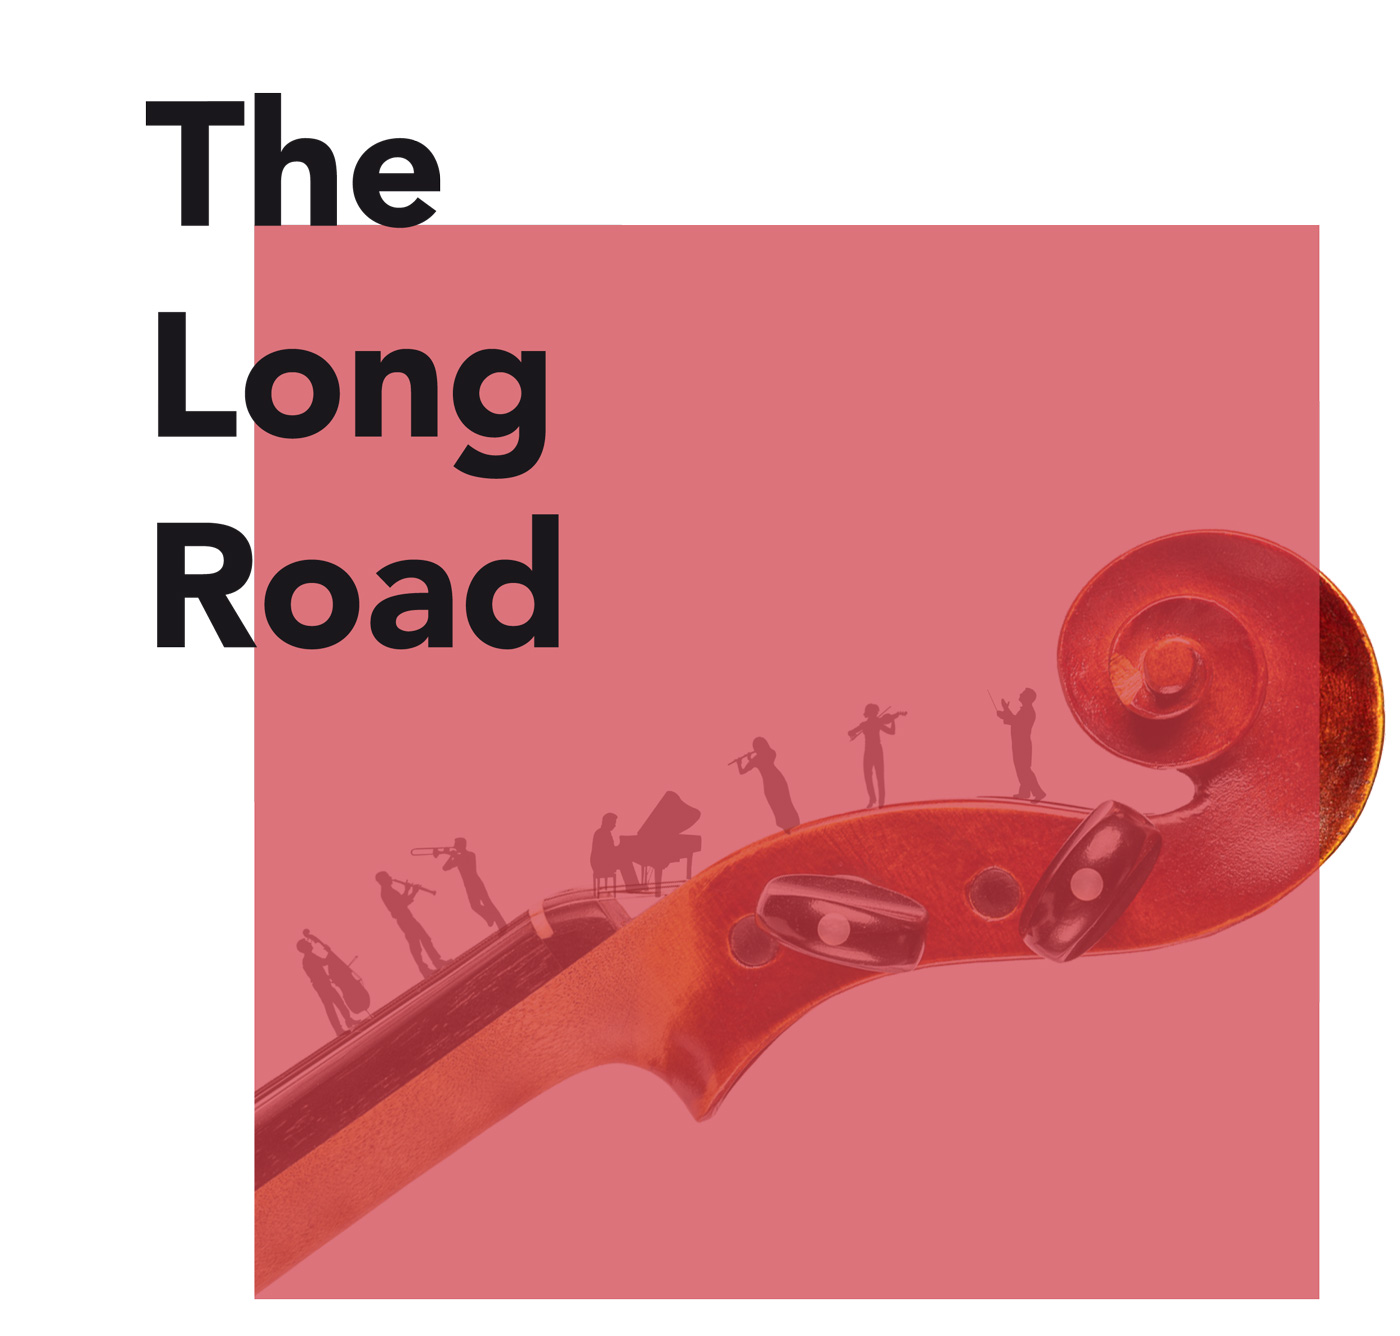 THE LONG ROAD